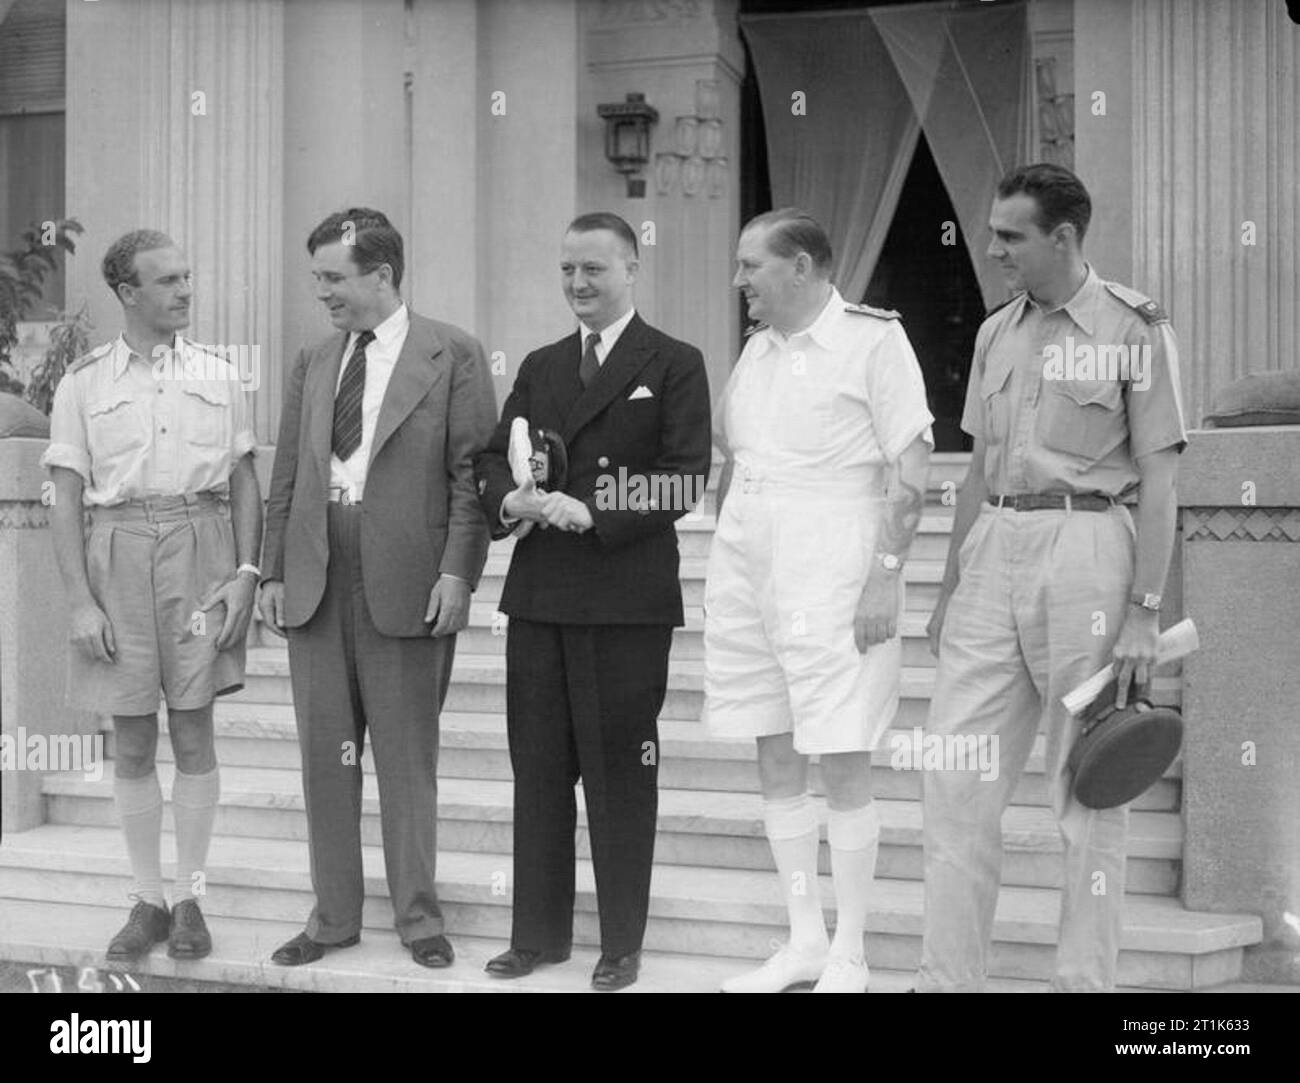 Mr Wendell Willkie in Alexandria. during His Middle East Tour Mr Wendell Willkie Met Admiral Sir Henry Harwood, General Maxwell and Pressmen. 6 September 1942. (L to R) John Nixon, Mr Wendell Willkie, Larry Allen, Admiral Sir Henry Harwood and George Palmer. Stock Photo